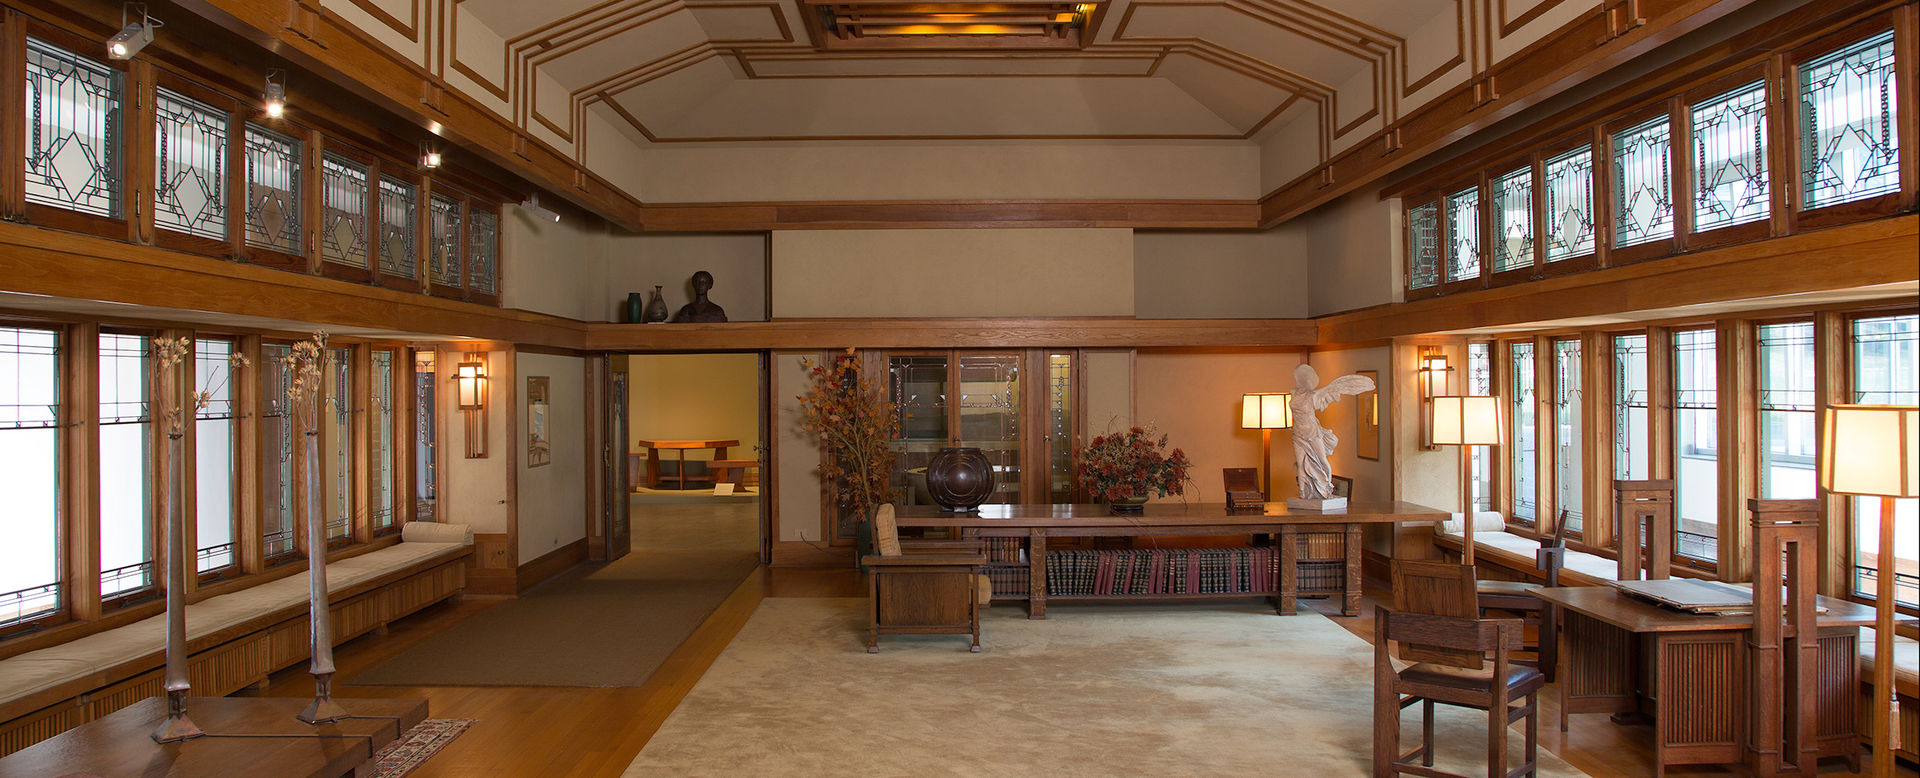 Large living room with oak trim and geometric windows designed by Frank Lloyd Wright